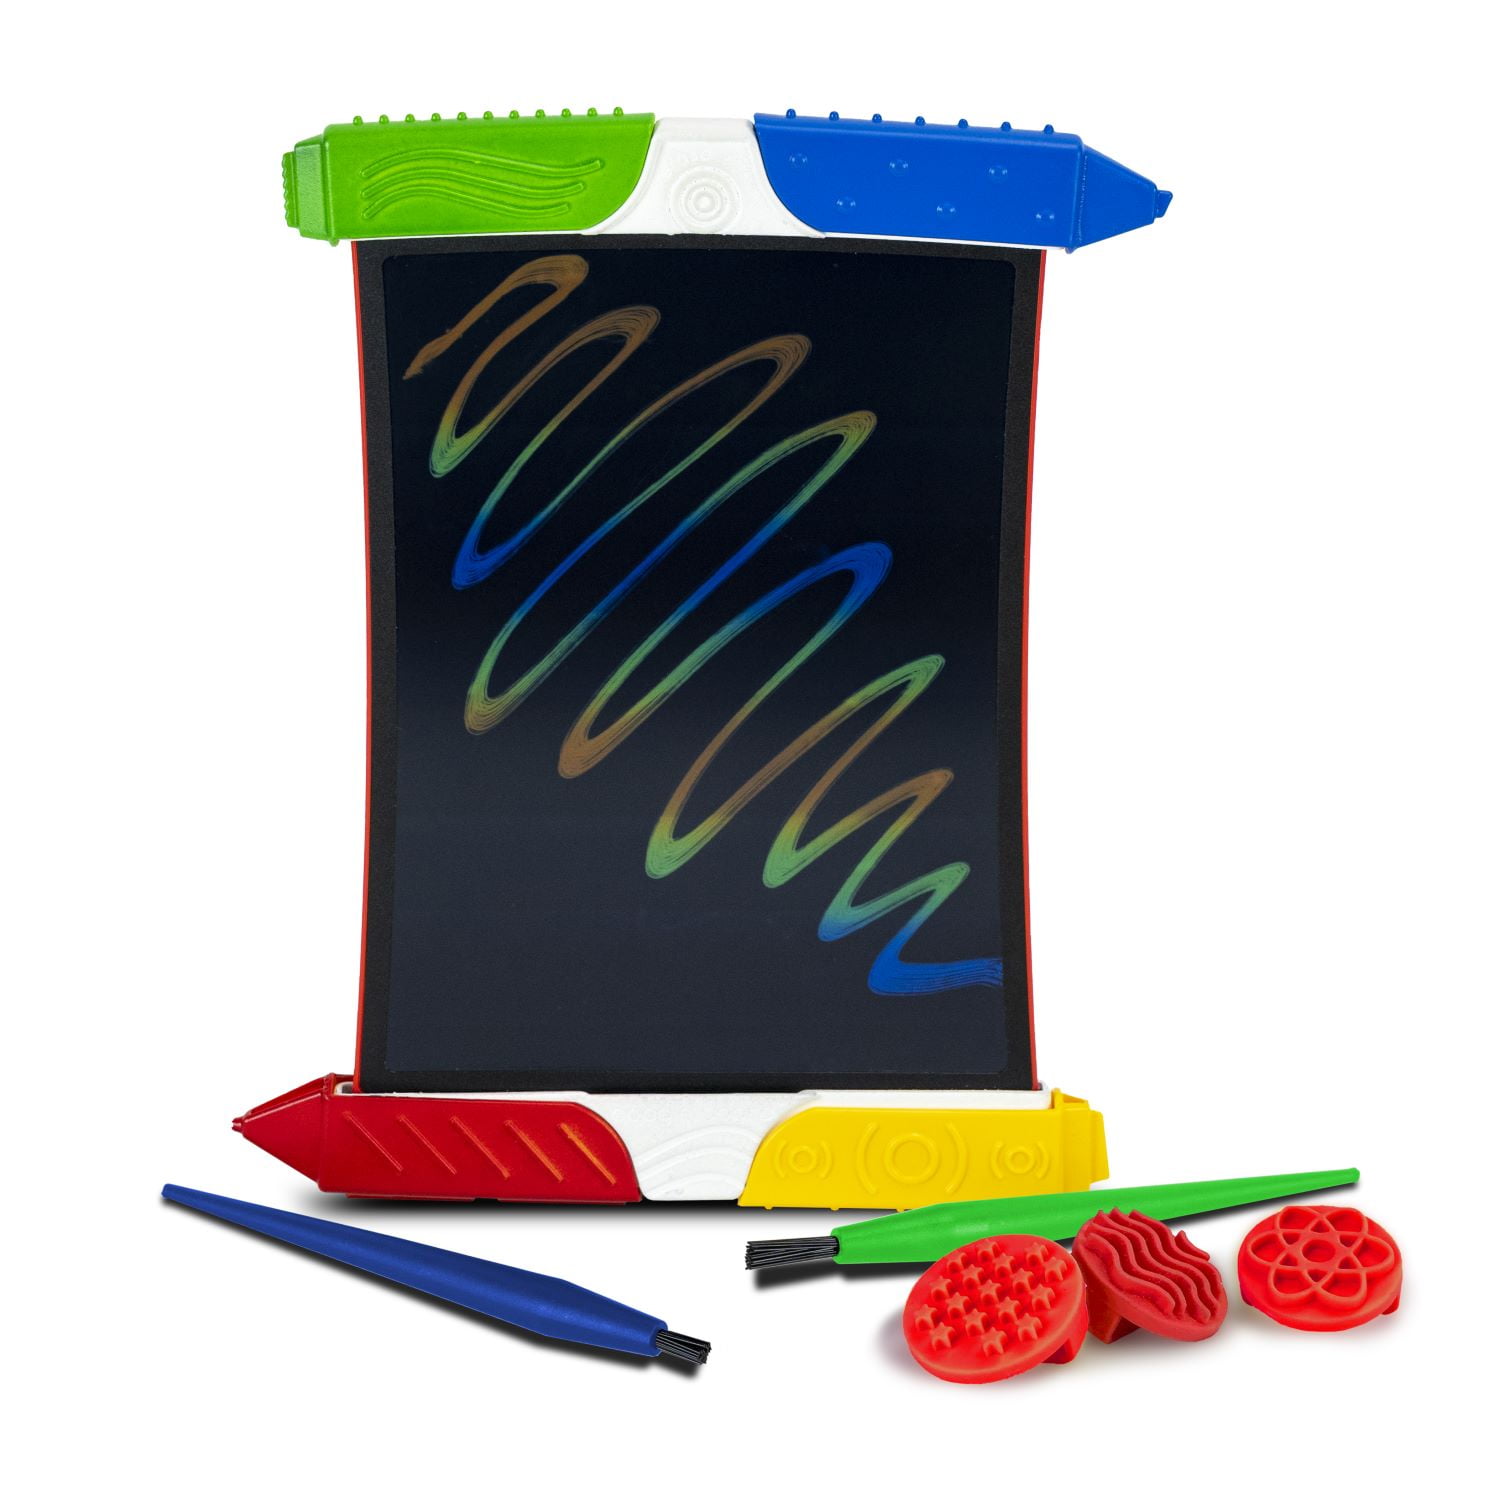 Cra-Z-Art Original MagnaDoodle Deluxe Doodle Magnetic Drawing Toy for All  Ages, Unisex 